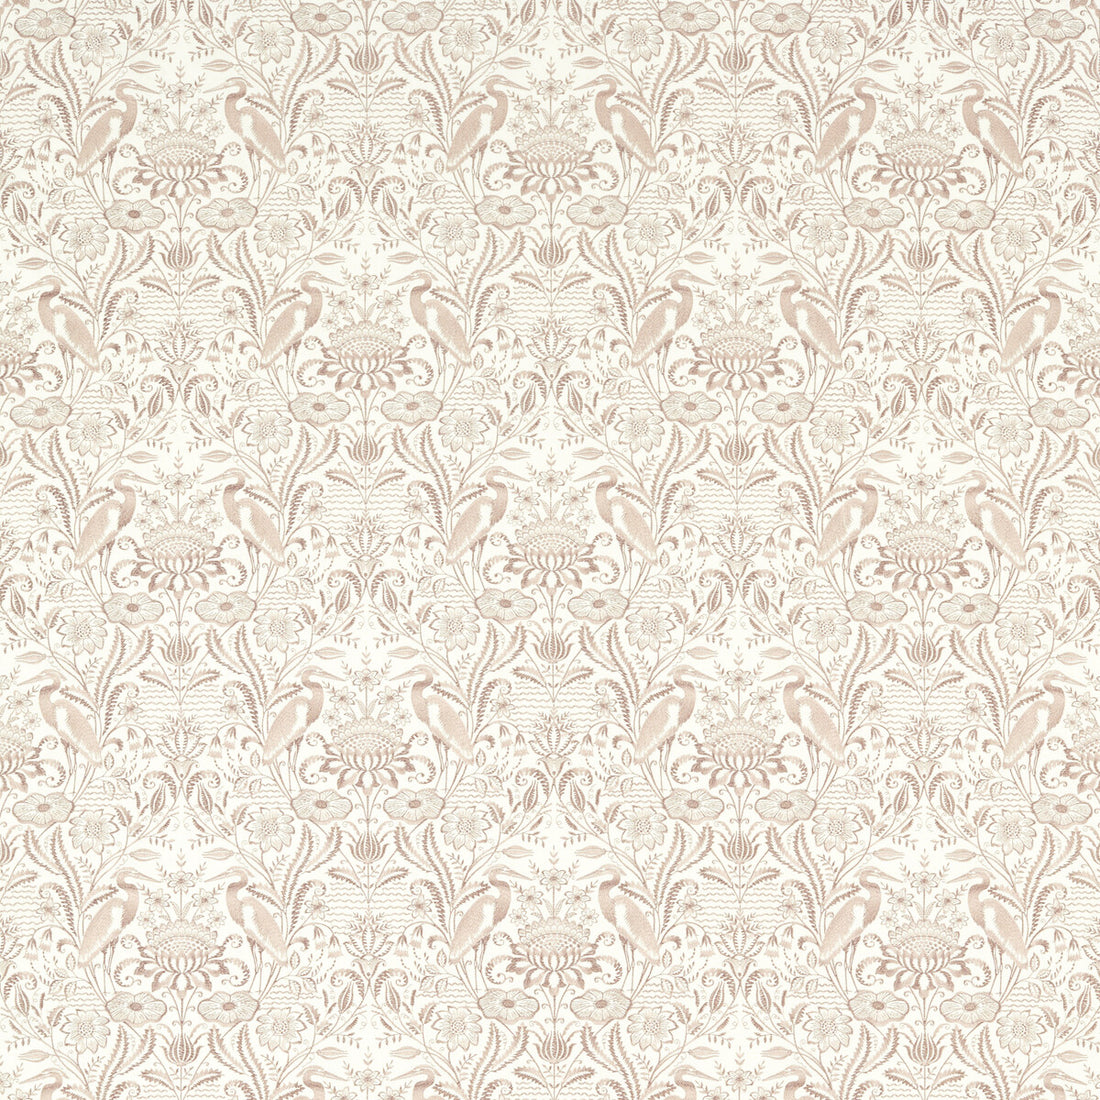 Nakuru fabric in blush color - pattern F1547/01.CAC.0 - by Clarke And Clarke in the Clarke &amp; Clarke Vintage collection